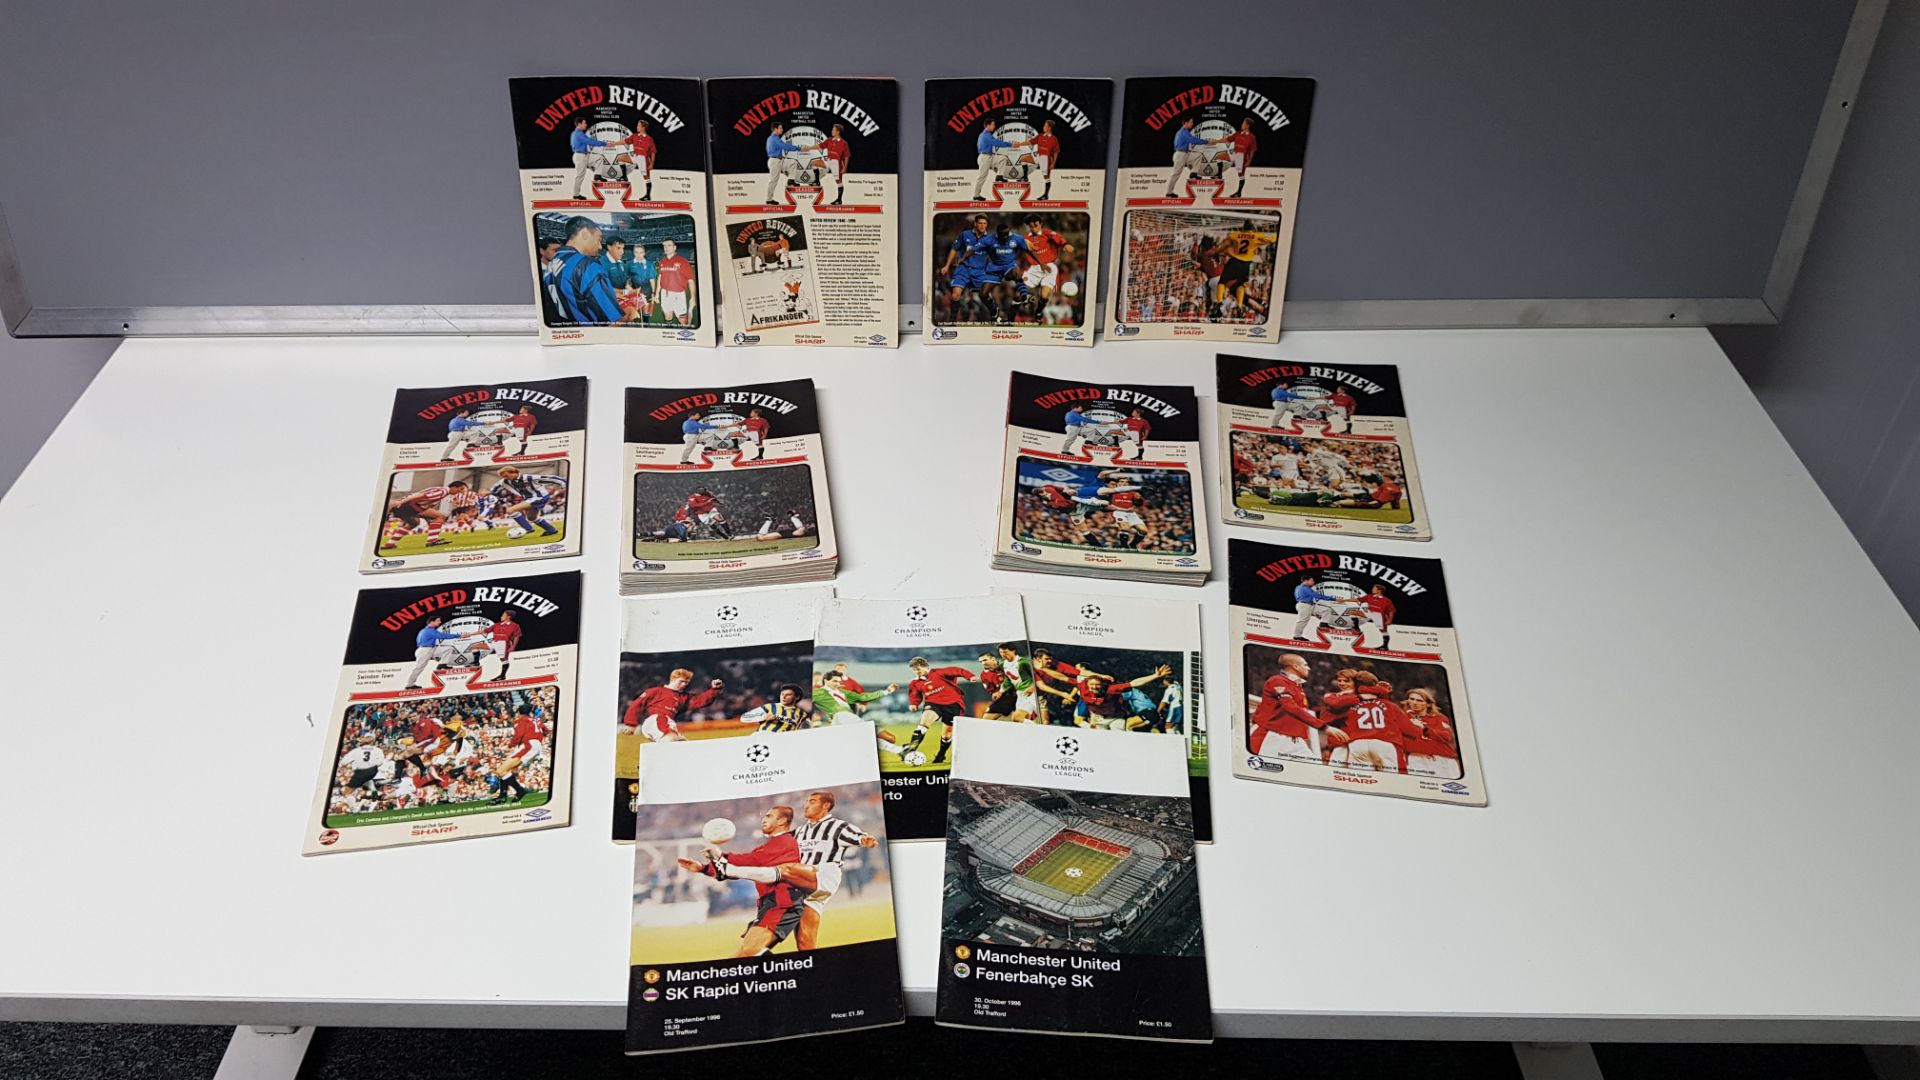 COMPLETE COLLECTION OF MANCHESTER UNITED HOME GAME PROGRAMMES FROM THE 1996/1997 SEASON. FROM